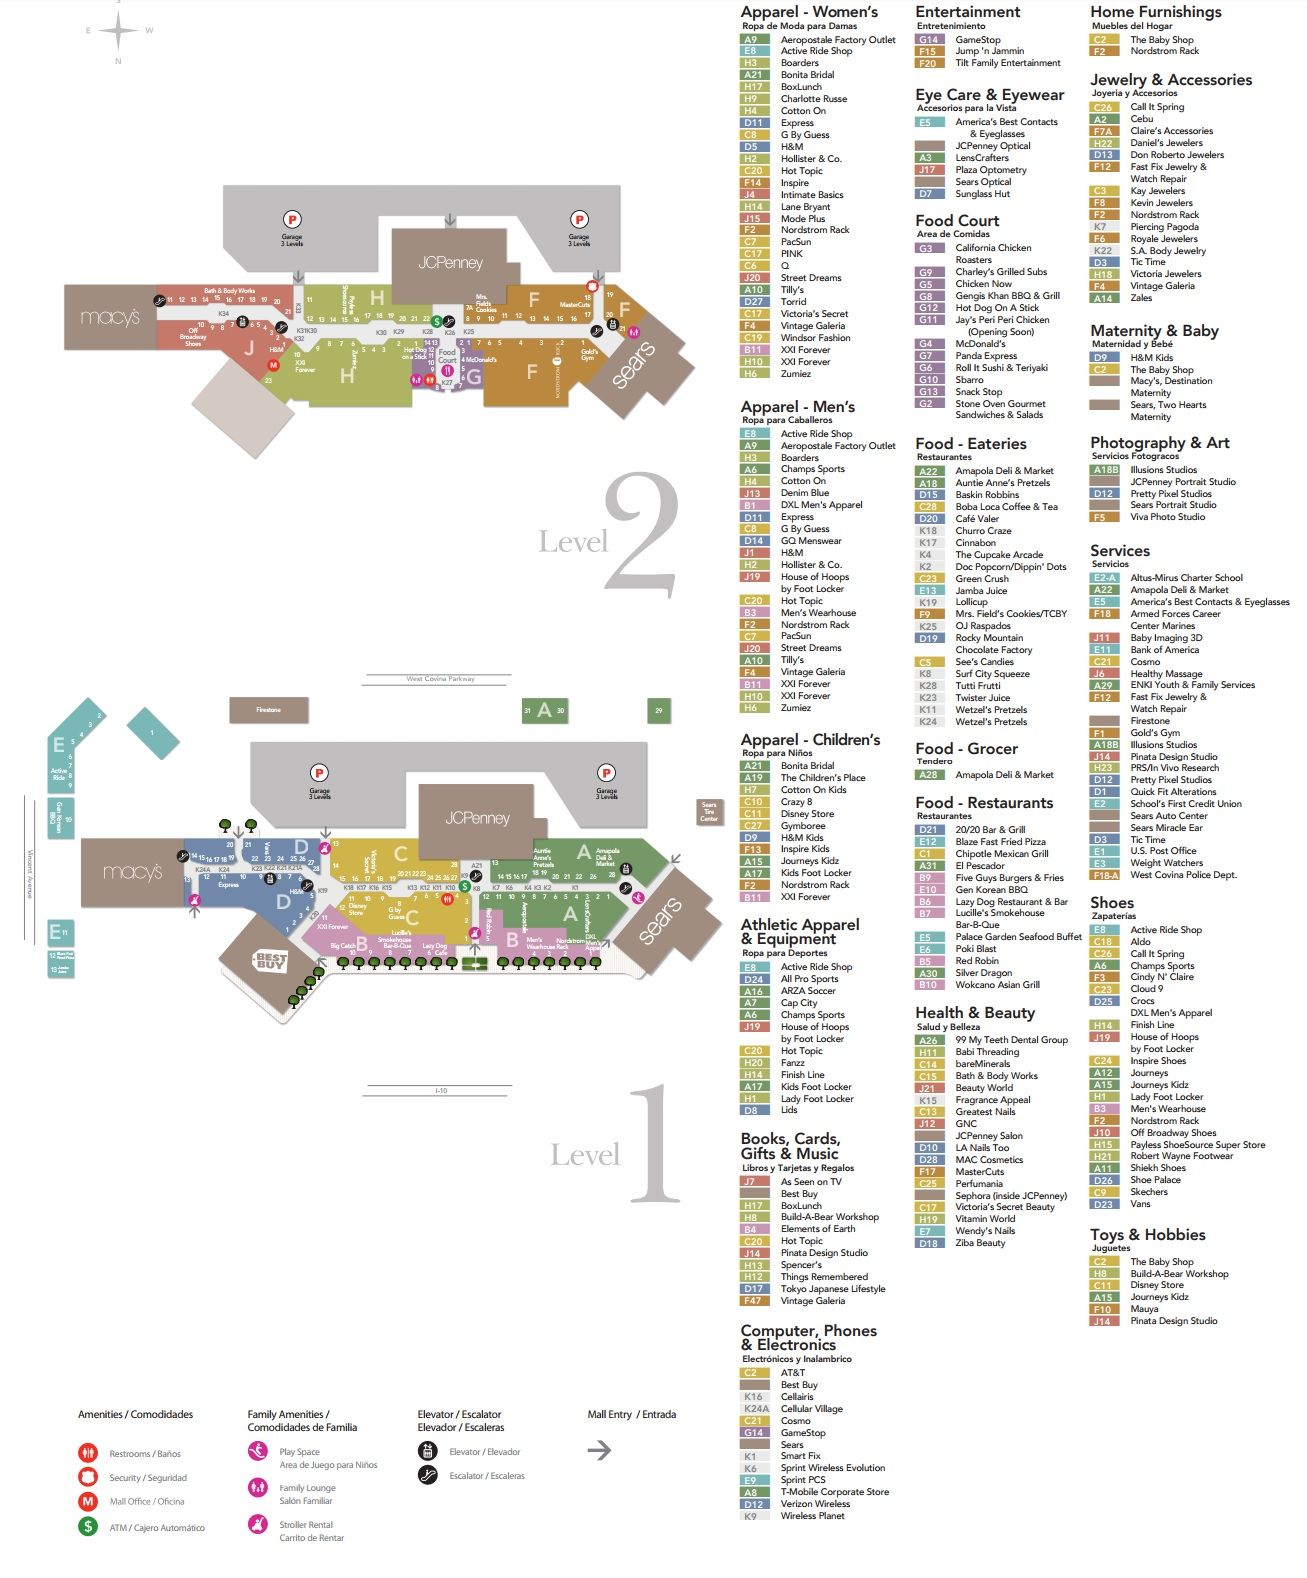 Garden State Plaza Mall Map - Maps